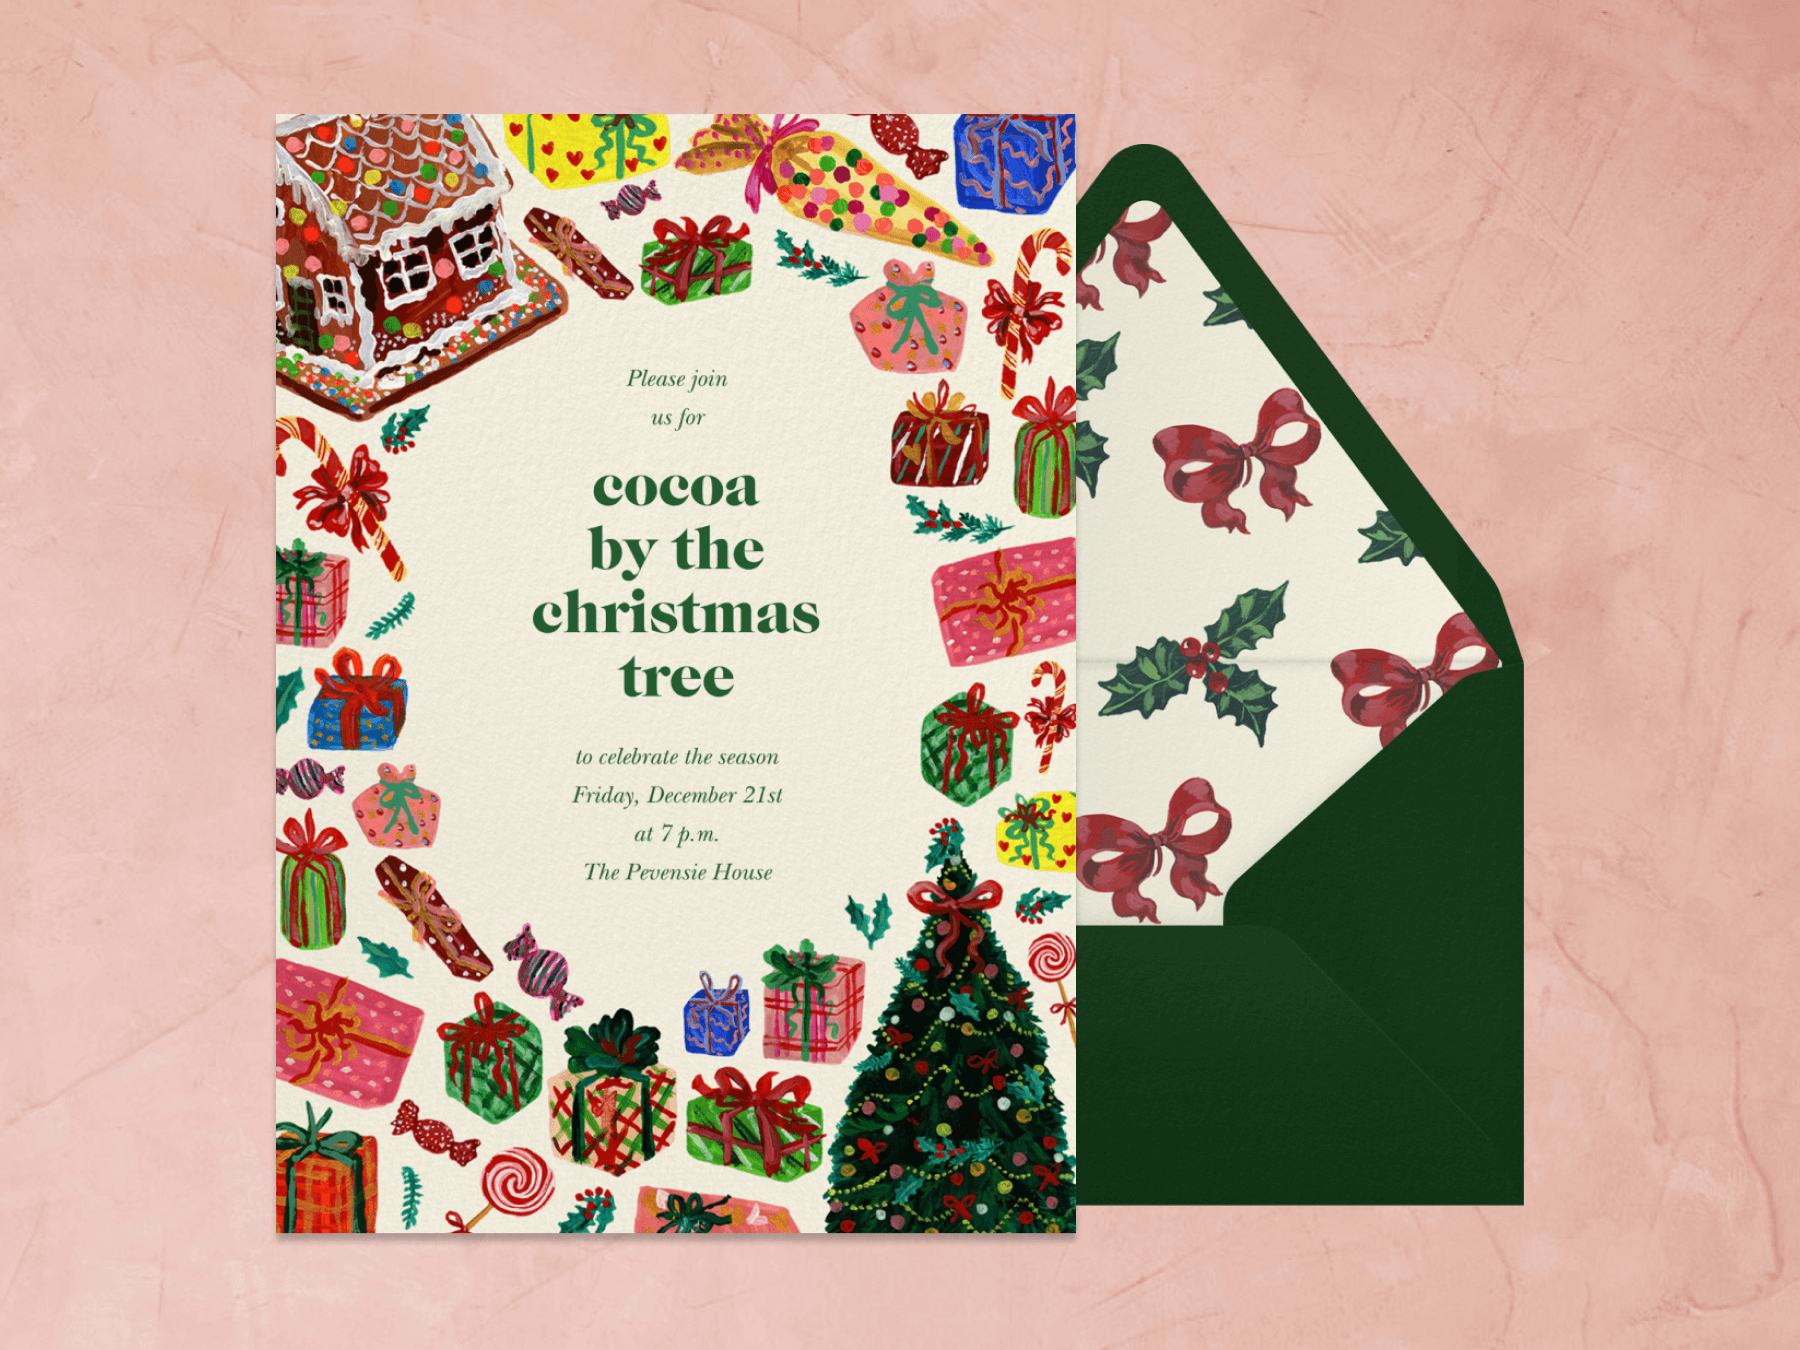 A holiday party invitation with painted gingerbread houses, Christmas tree, and colorfully wrapped gifts around the border.